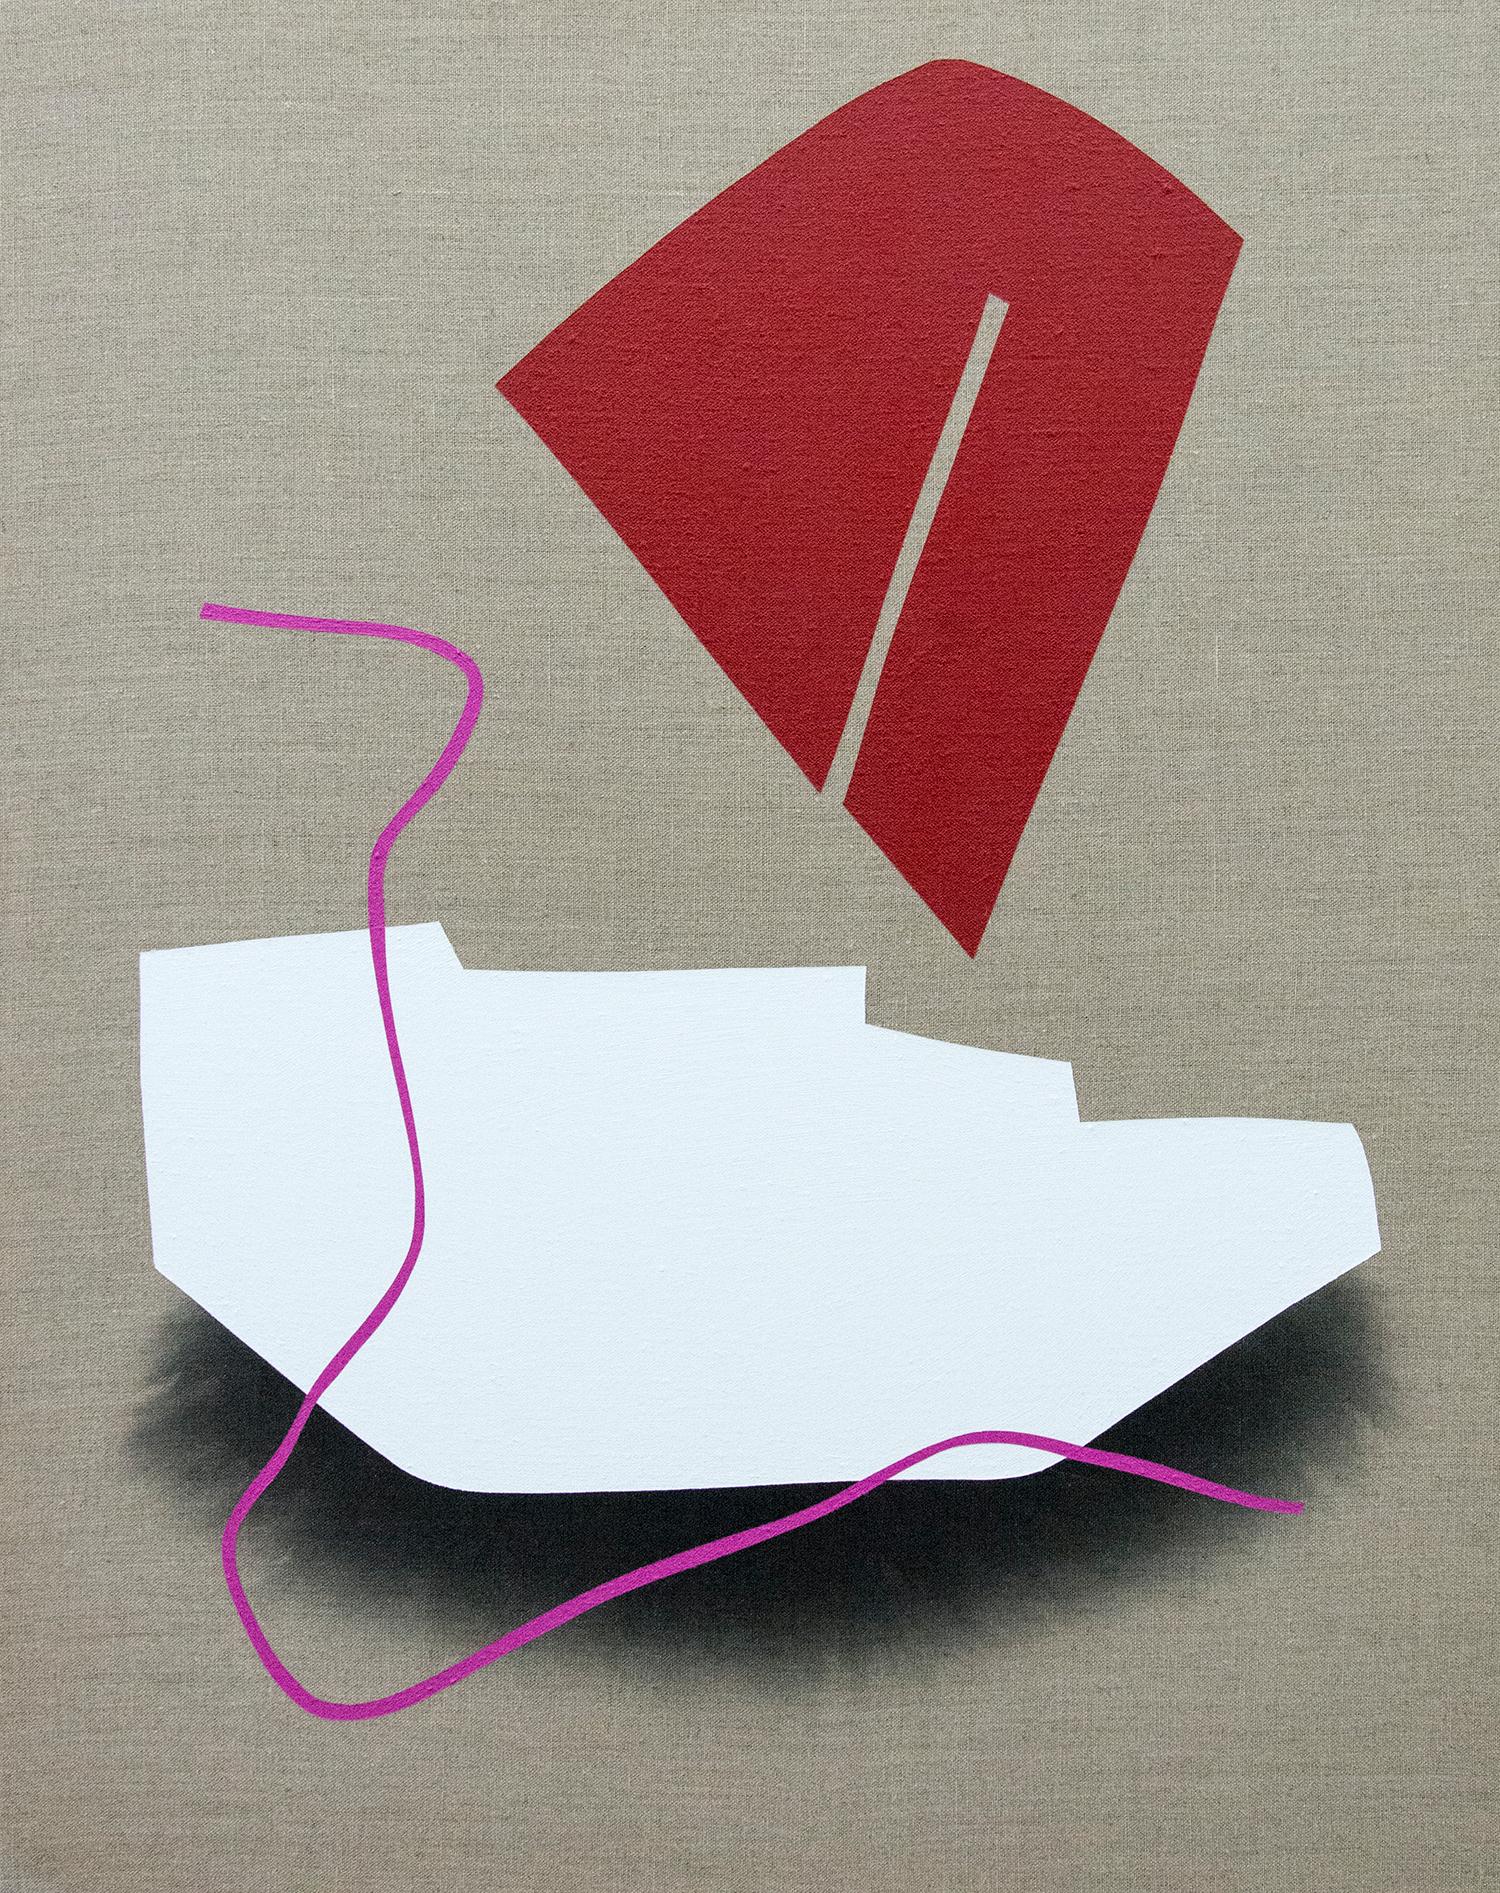 Red and White Blocks - grouping of four playful paintings on linen - Contemporary Painting by Aron Hill